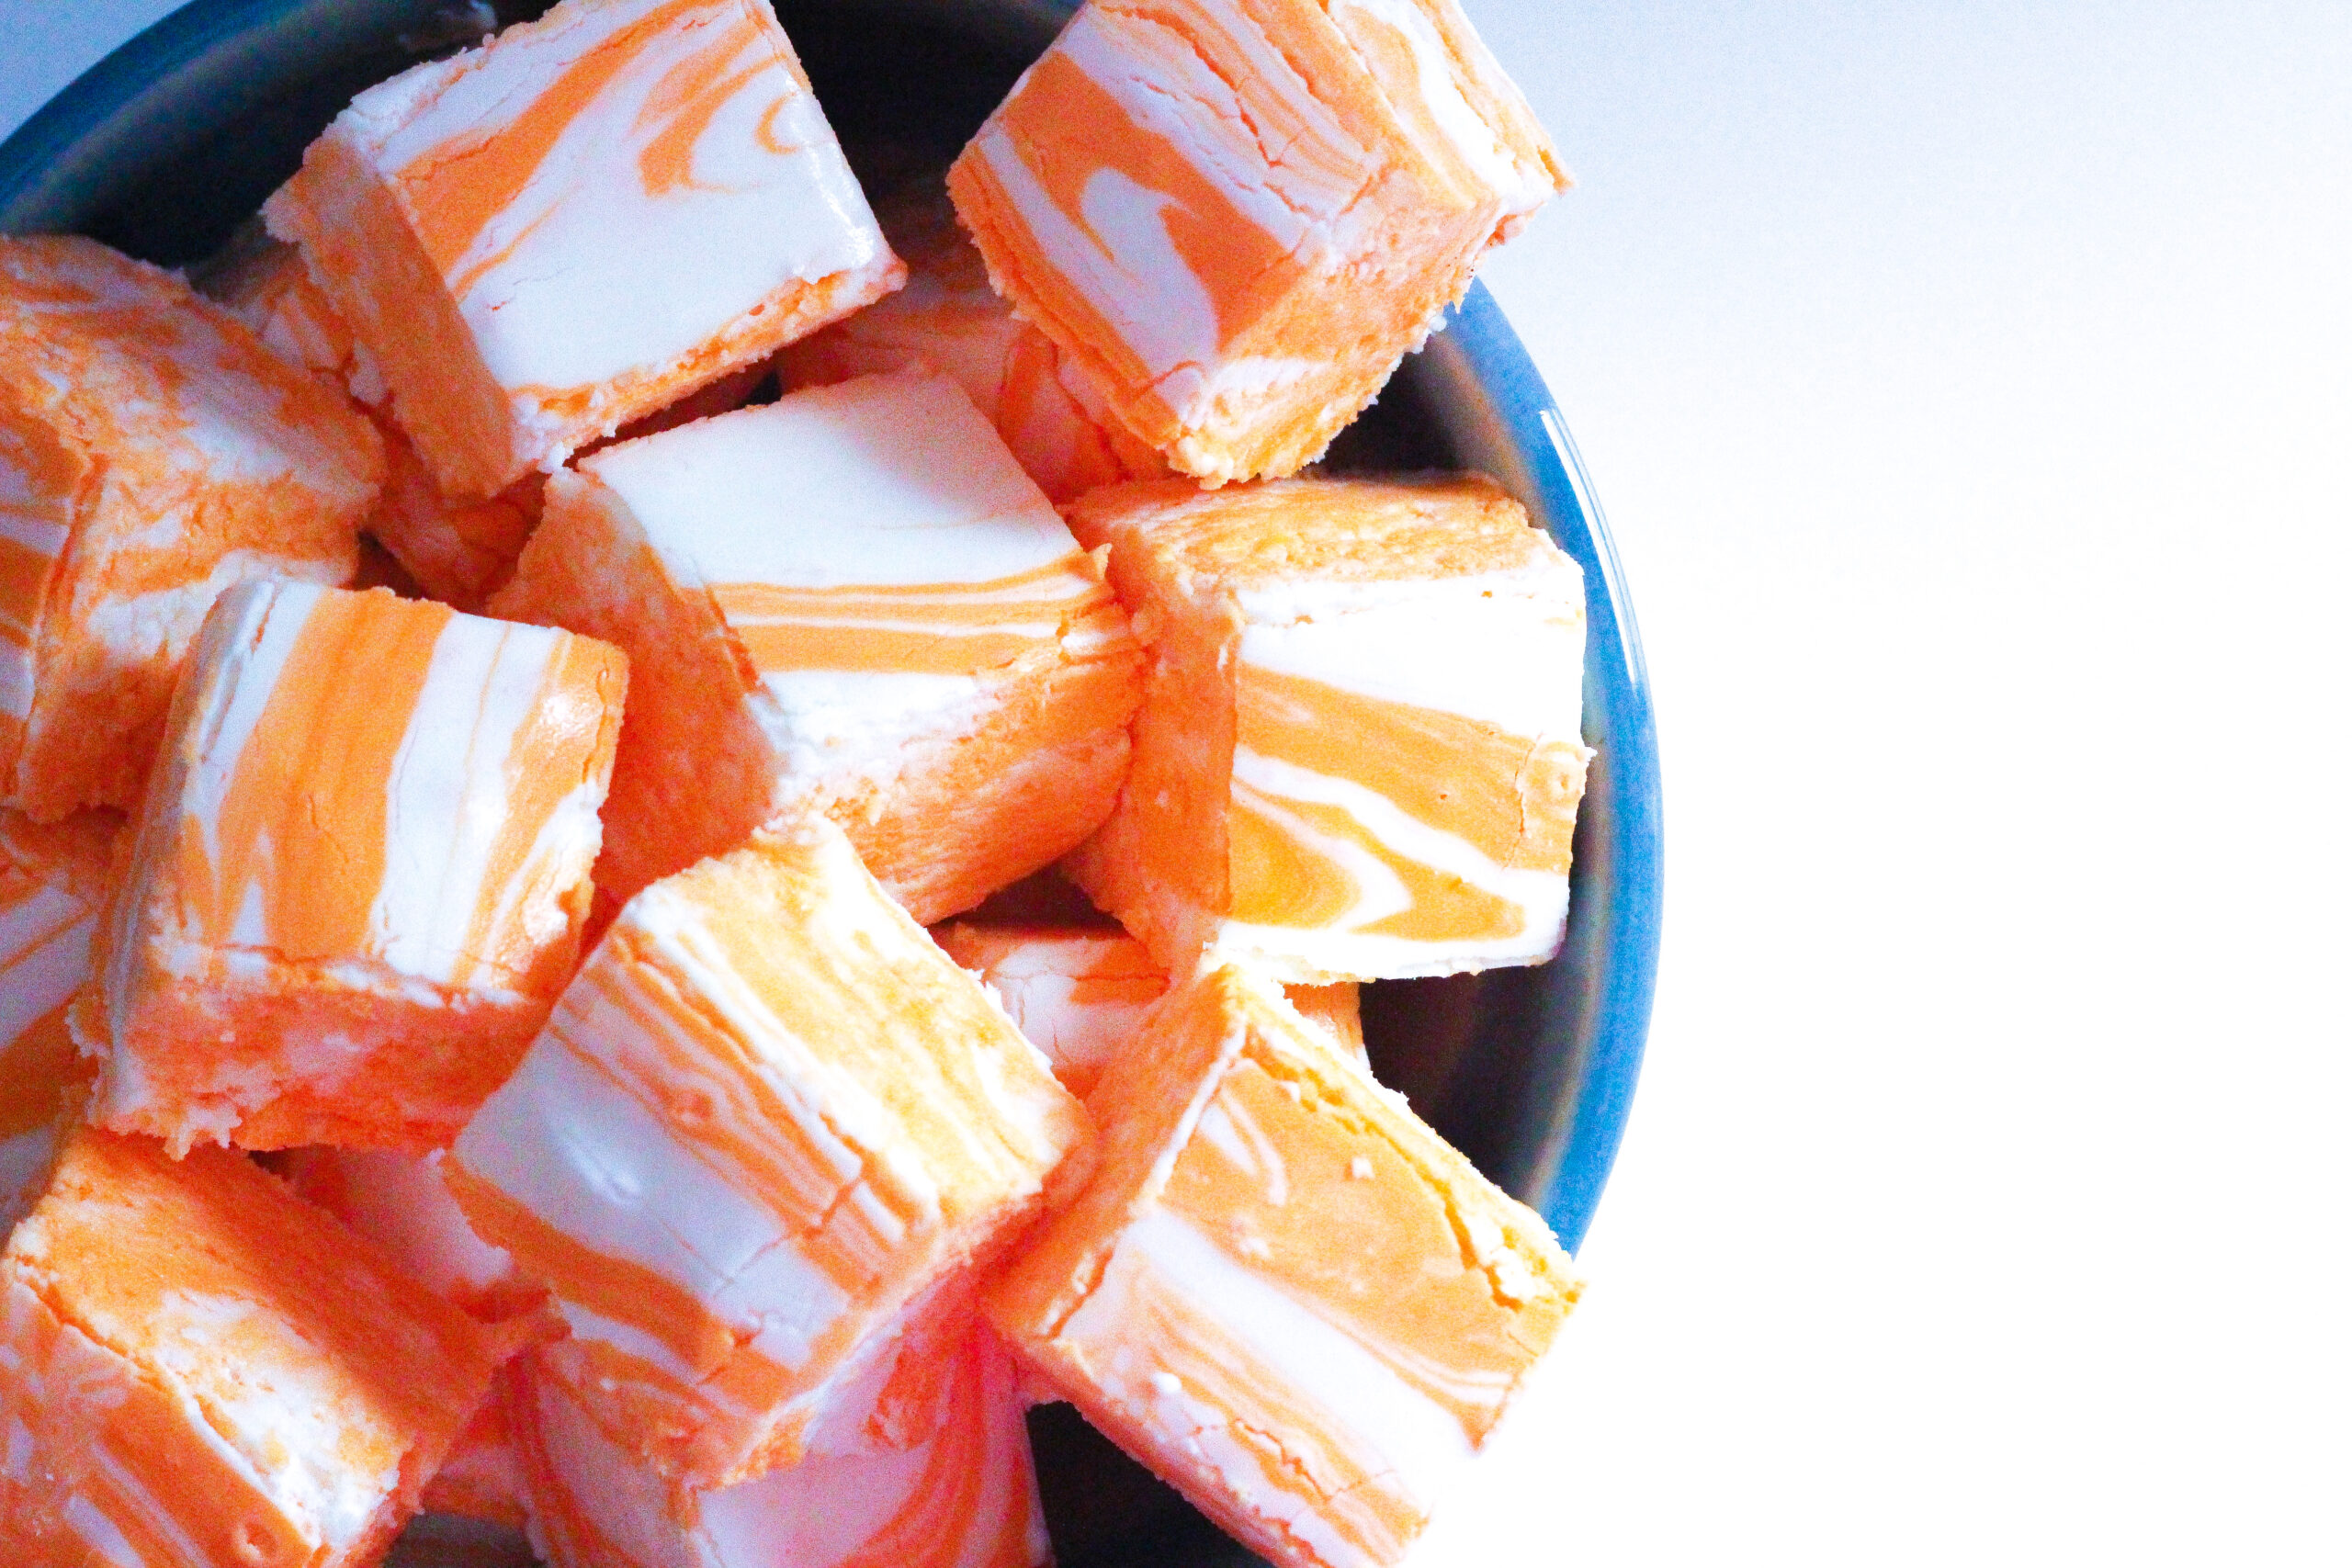 Top down view of creamsicle fudge - squares of swirled orange and white, sitting in a blue-rimmed bowl on a white surface.